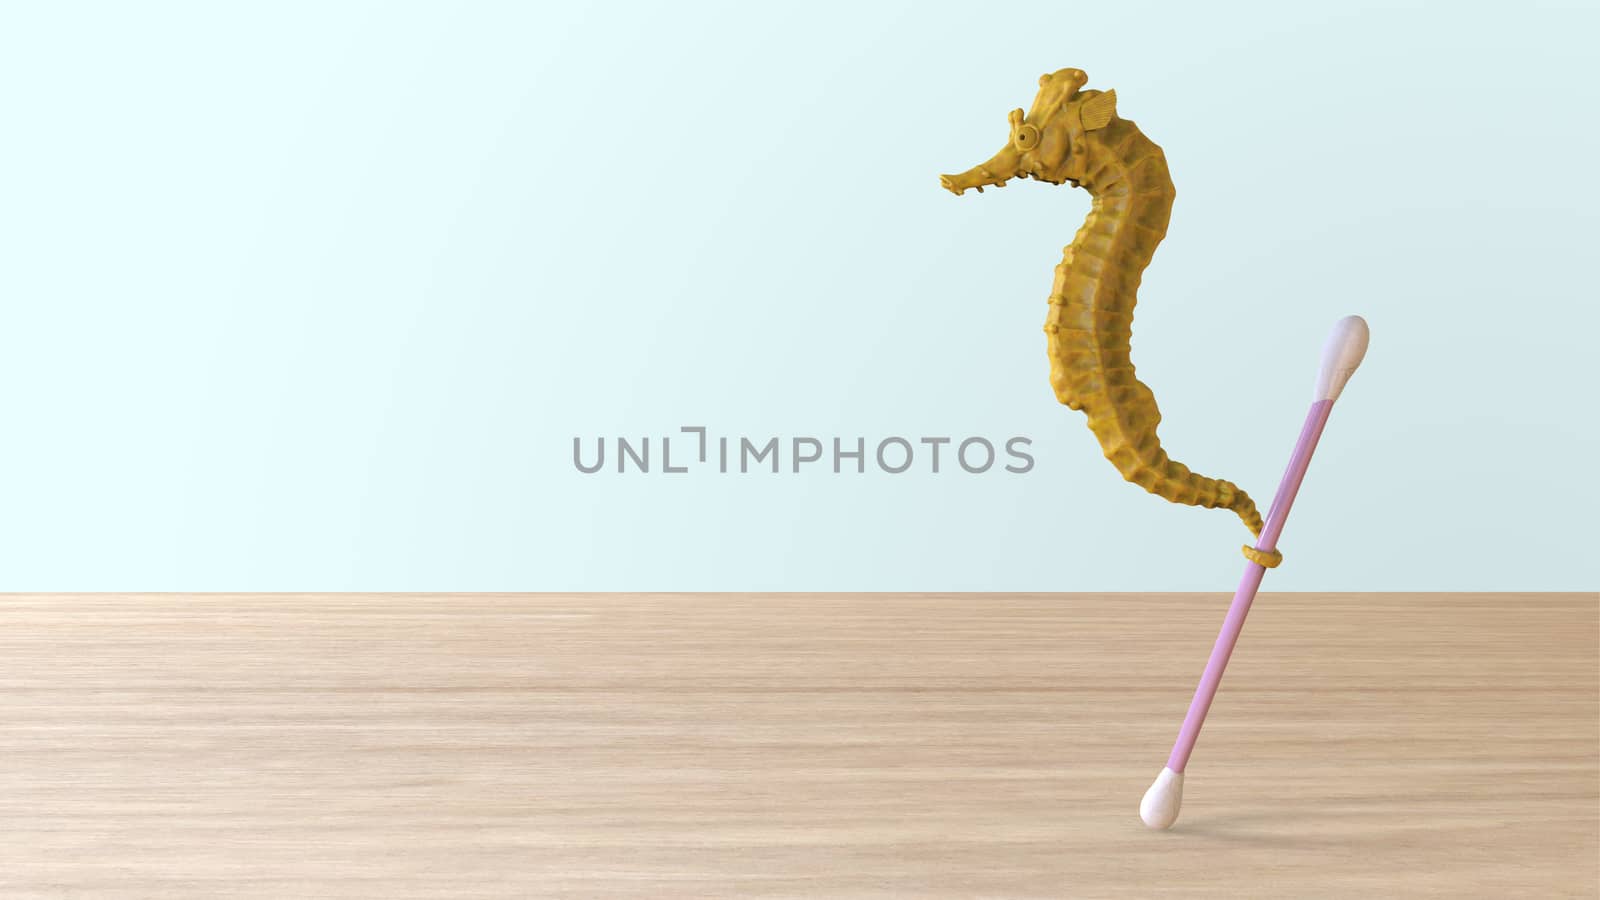 Stop ocean plastic pollution. Render sculpt 3d Side view of a Common yellow Seahorse with swabs. Composed of white plastic waste bag, bottle on wood table with blue background. Plastic problem. by Andreajk3